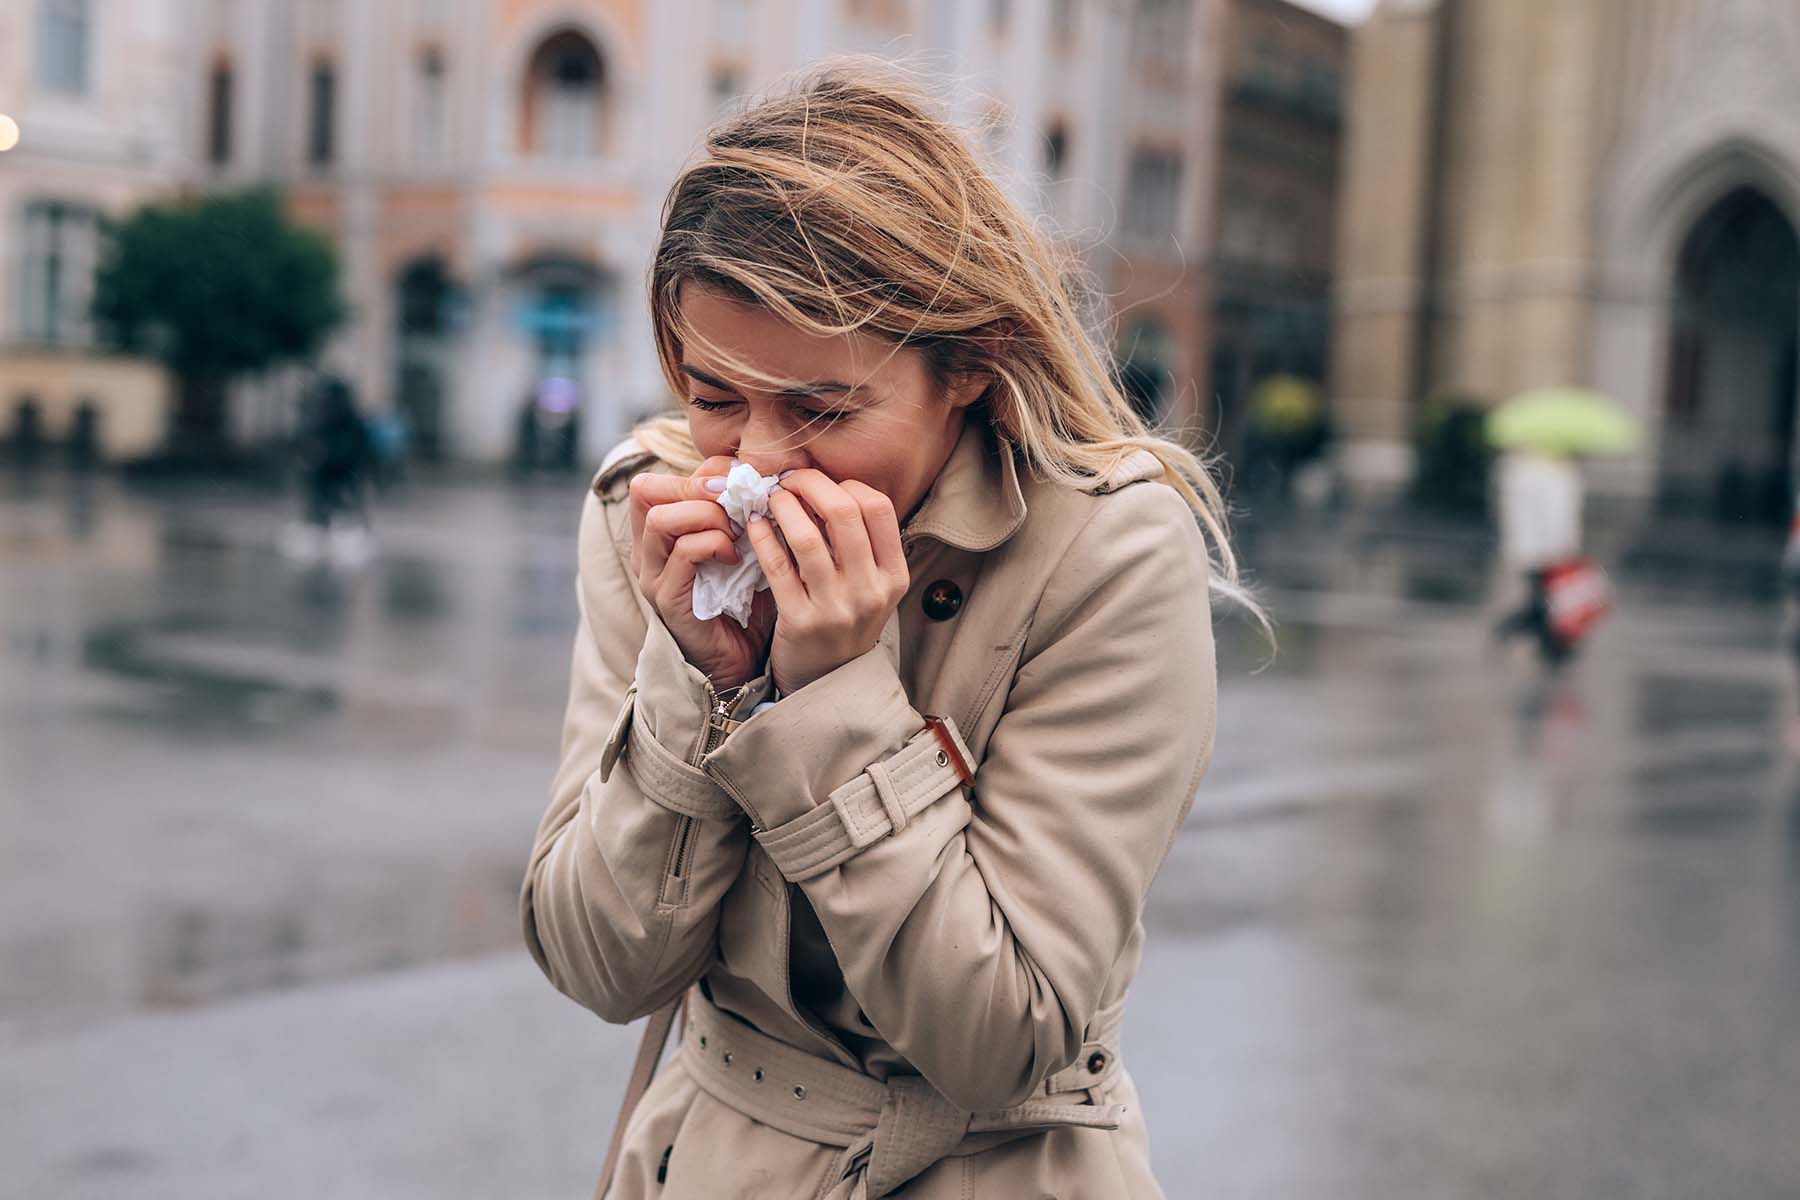 Lady walking down street in chilly weather blows her nose.